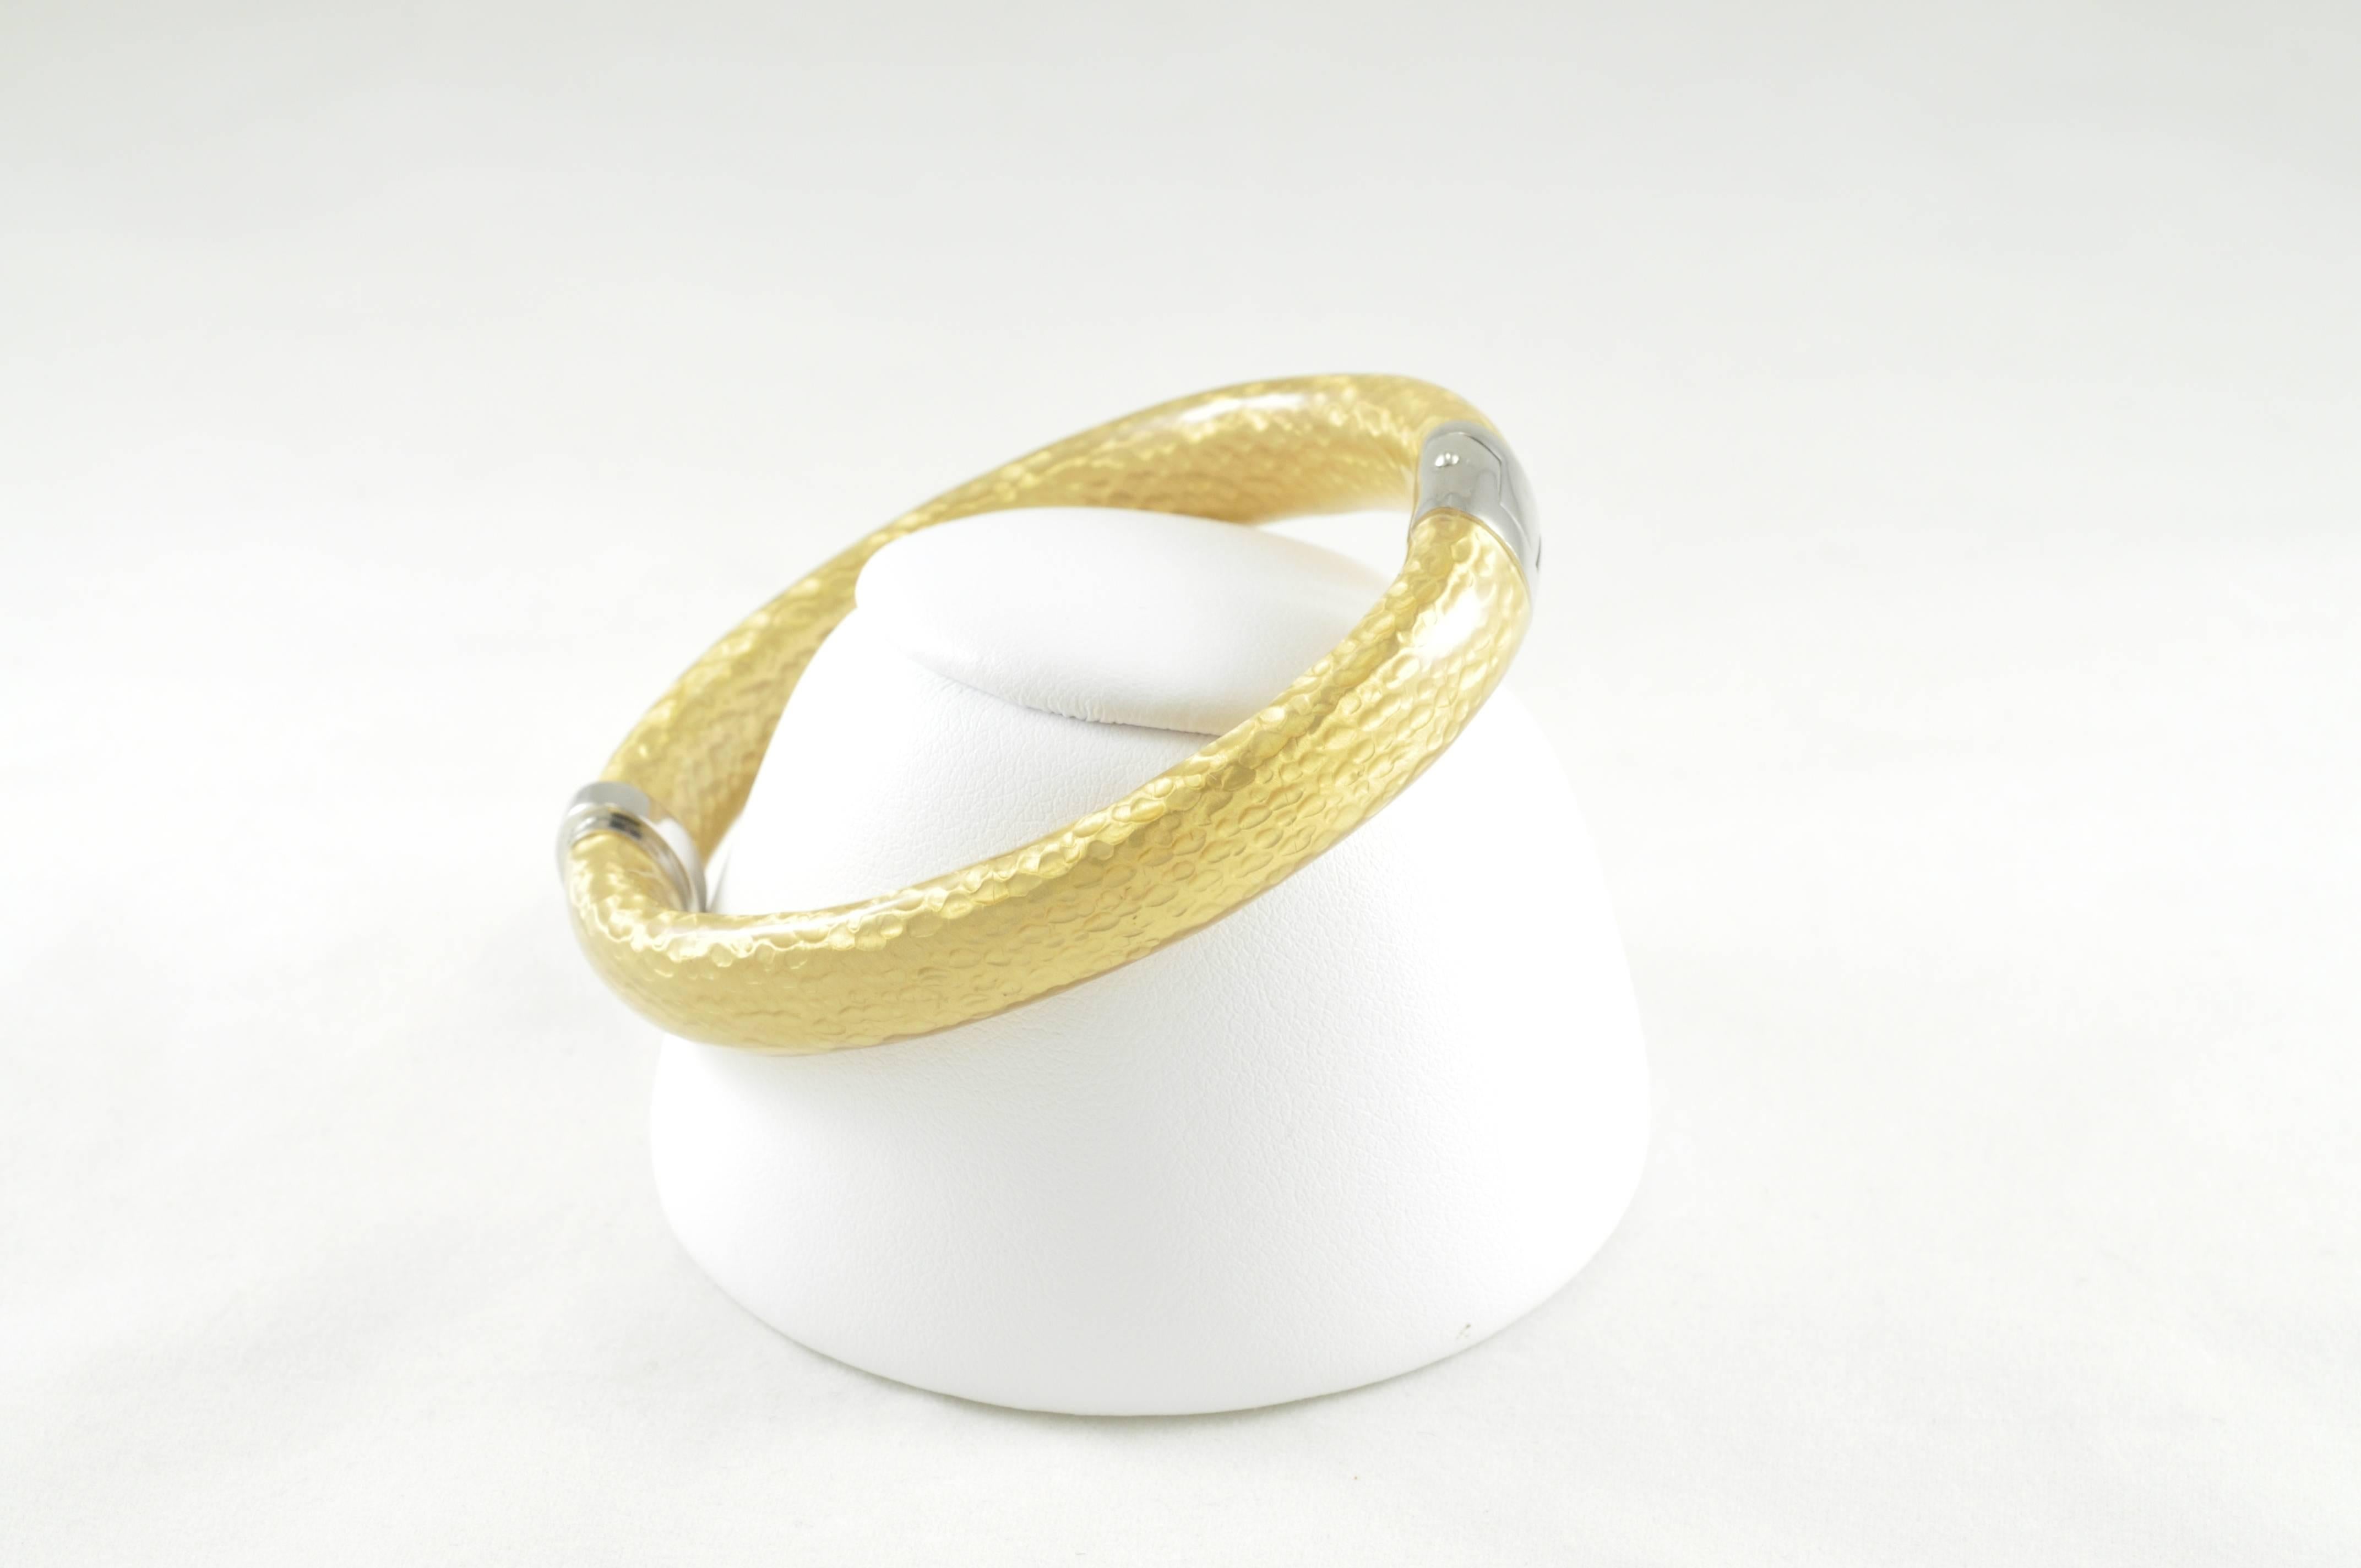 Beautiful SOHO designed Sterling Silver and Hammered-look Gold Enamel clamp bracelet with a Smooth finish. Interior dimension of 6.5 inches. Bracelet is stamped SOHO SLVR Ag925 Italy.
This bracelet looks wonderful alone or in groups for a fun way